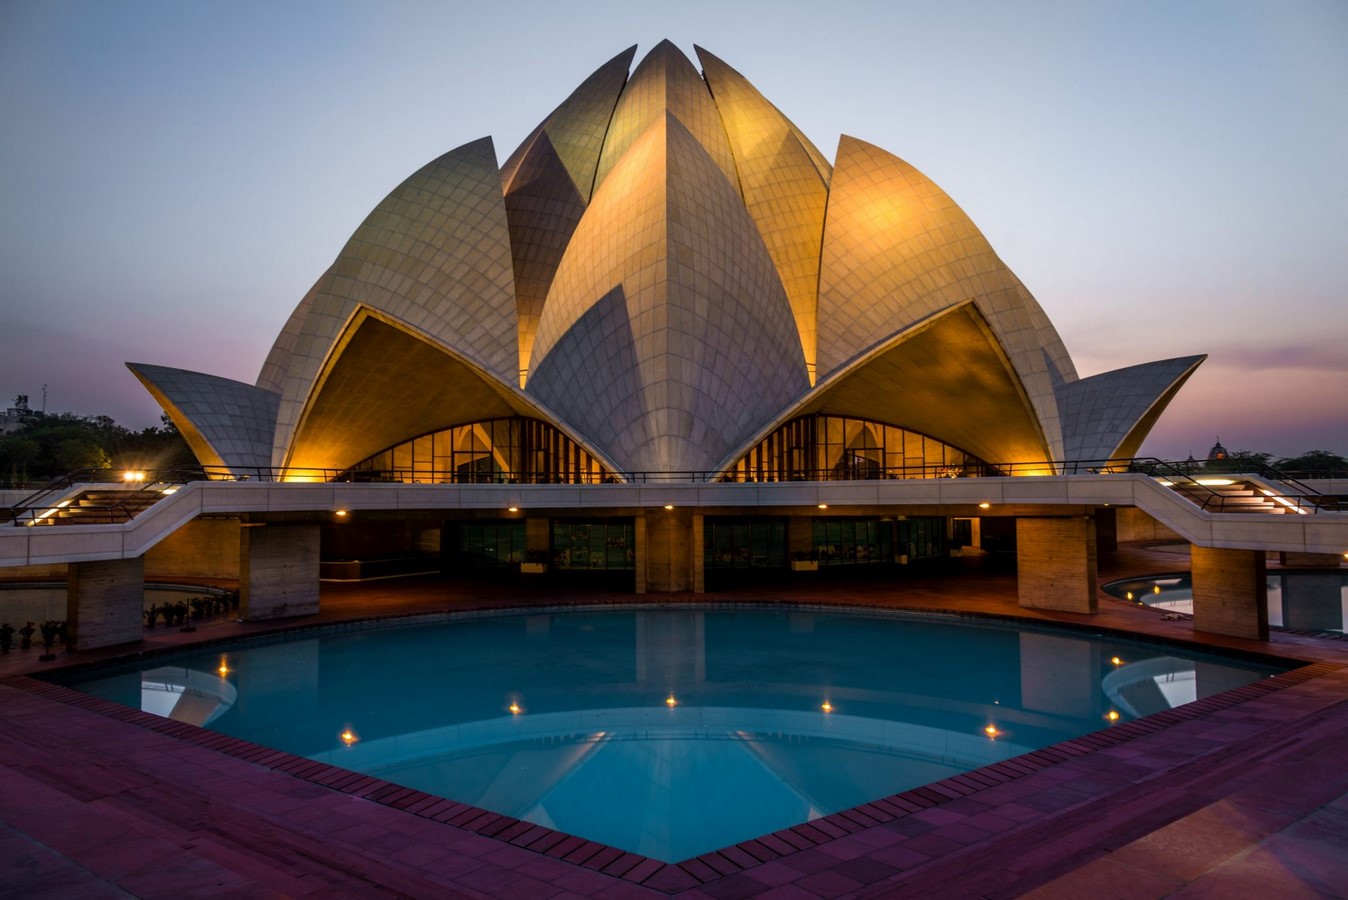 Buildings In India: 15 Architectural Marvels Every Architect Must See - Sheet19